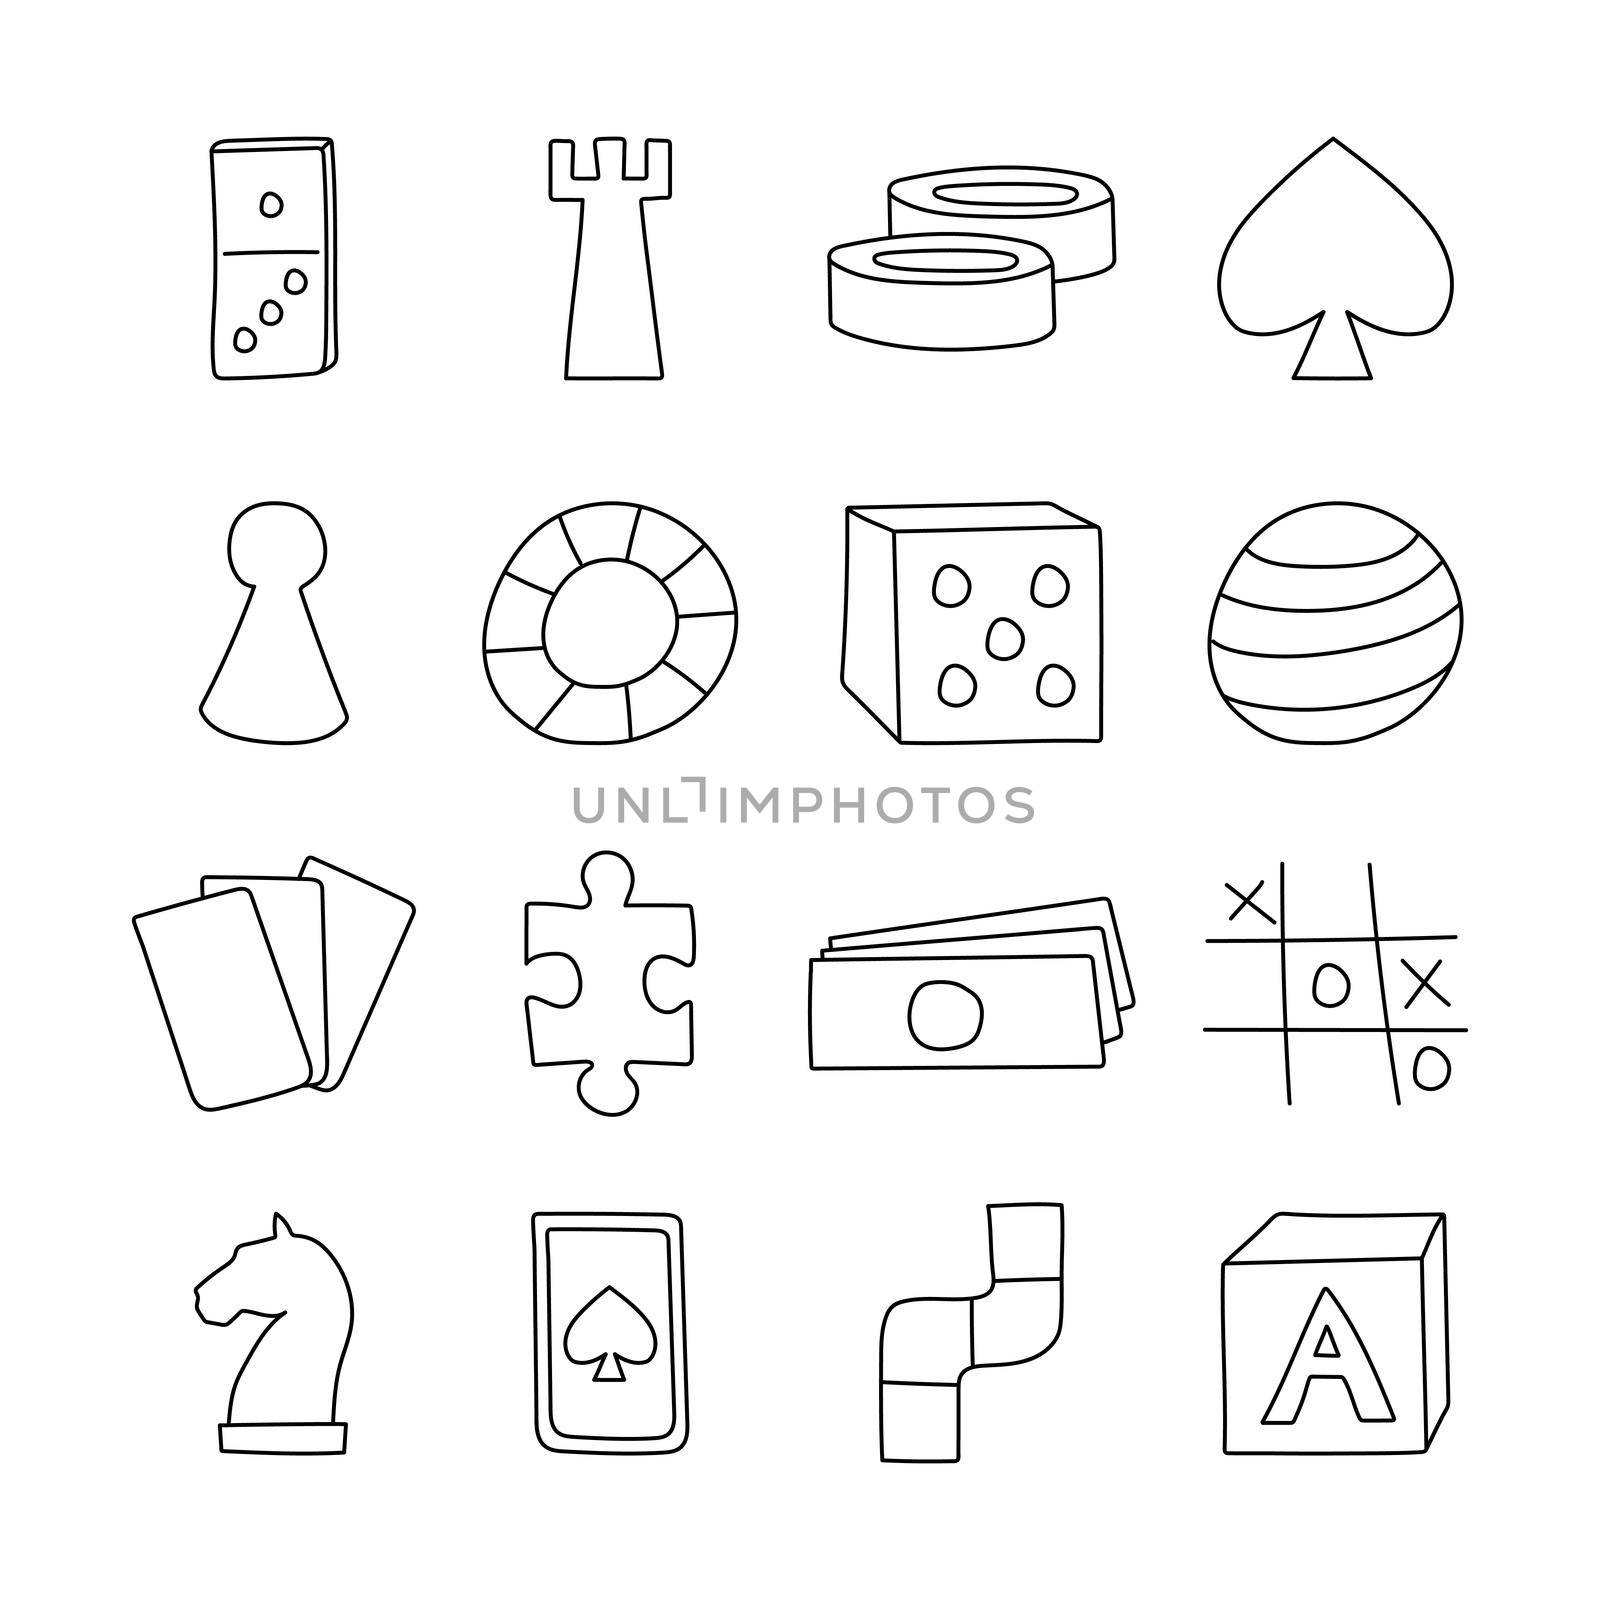 Board game icons in hand drawn cartoon style. Black and white doodle vector illustration.